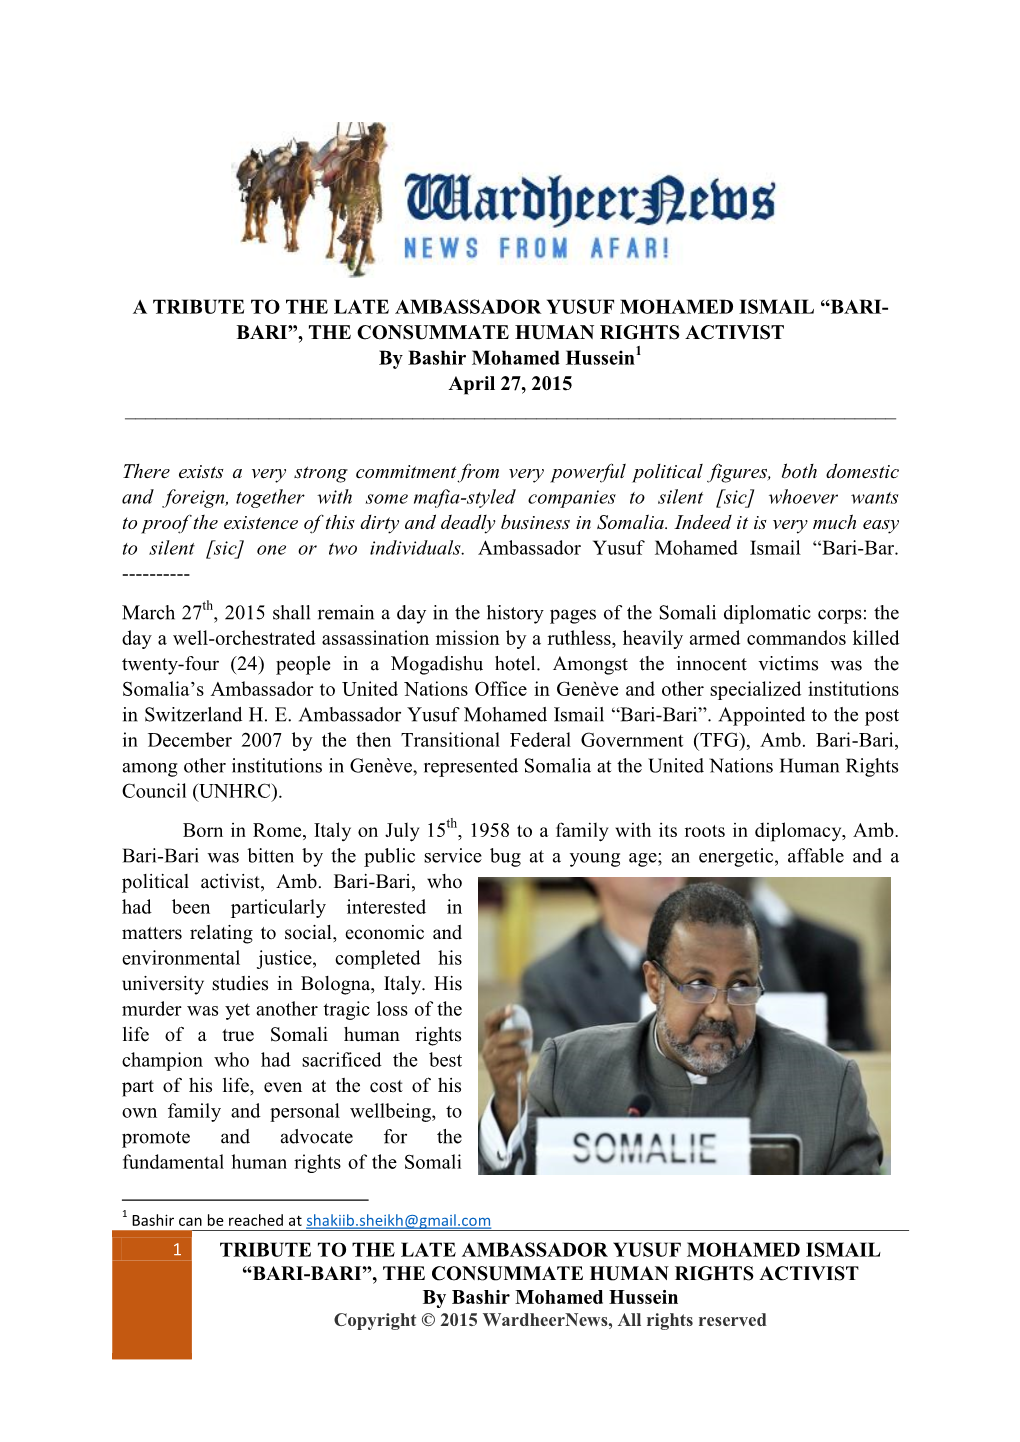 TRIBUTE to the LATE AMBASSADOR YUSUF MOHAMED ISMAIL “BARI- BARI”, the CONSUMMATE HUMAN RIGHTS ACTIVIST by Bashir Mohamed Hussein1 April 27, 2015 ______